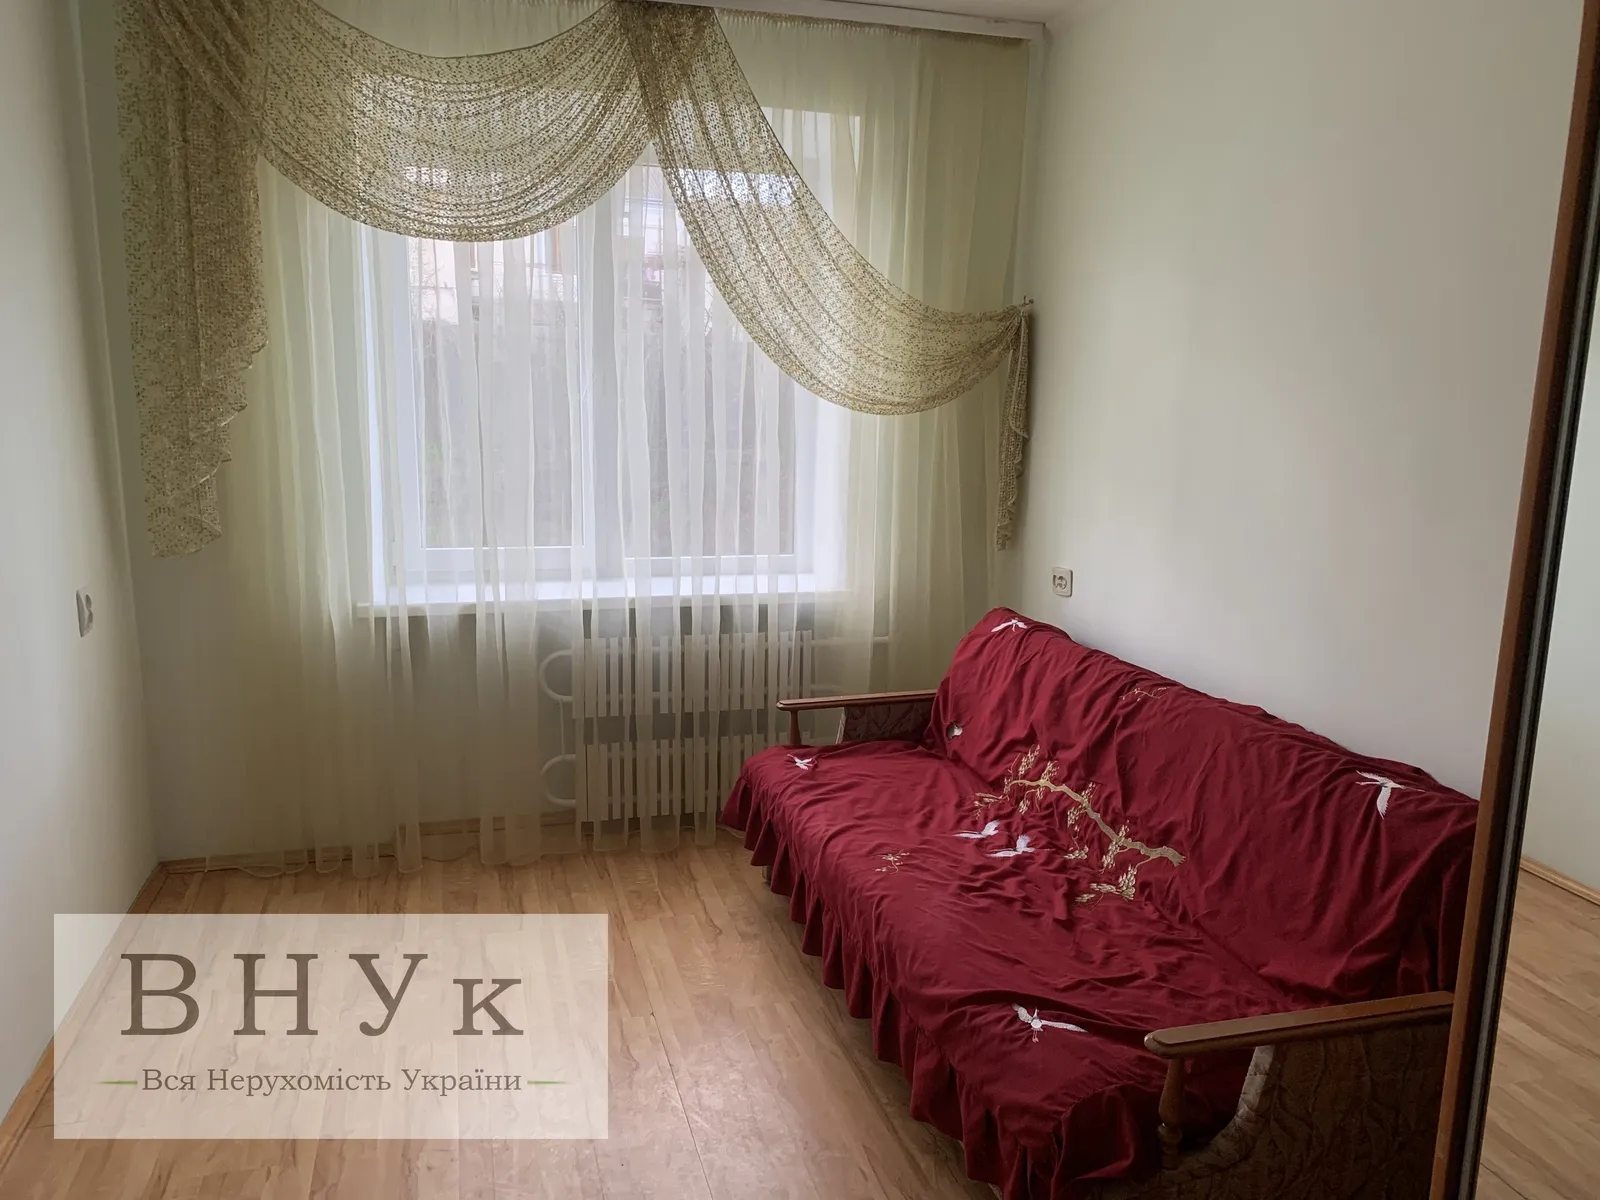 Apartments for sale. 2 rooms, 44 m², 2nd floor/5 floors. Ivanny Blazhkevych , Ternopil. 